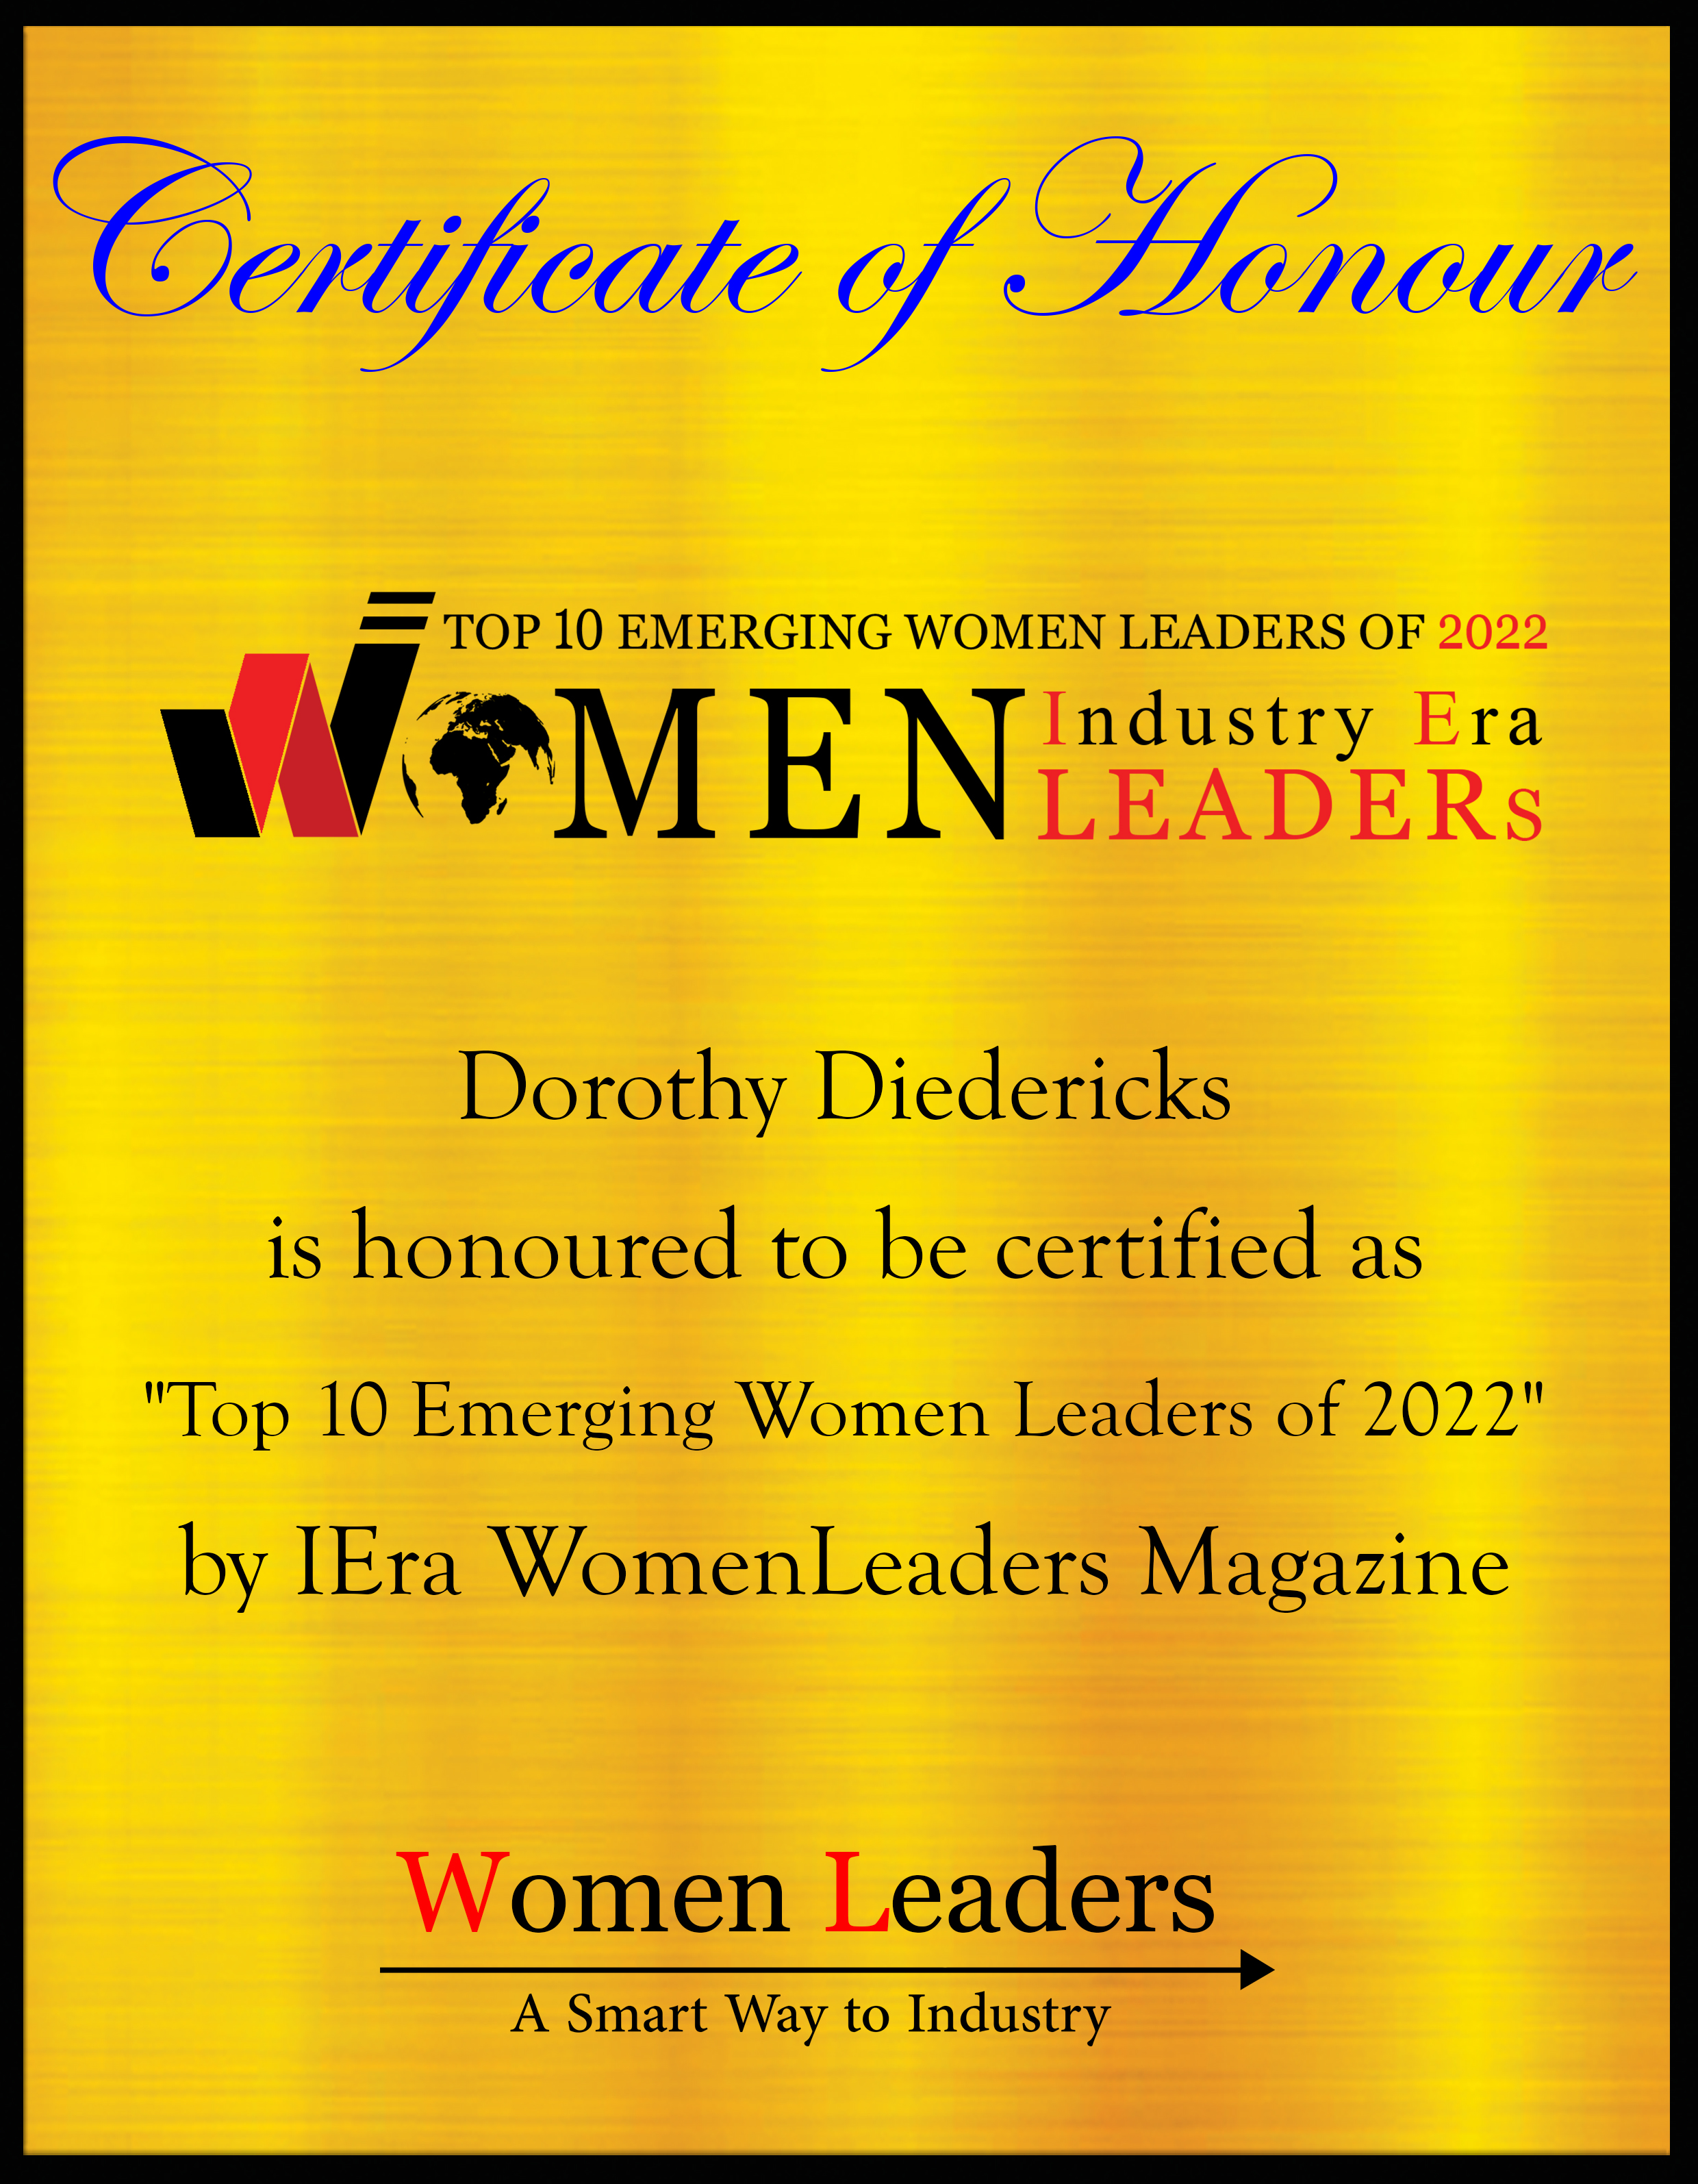 Dorothy Diedericks, Founder & CEO at BlueBlox GmbH, Most Empowering Women Leaders of 2022